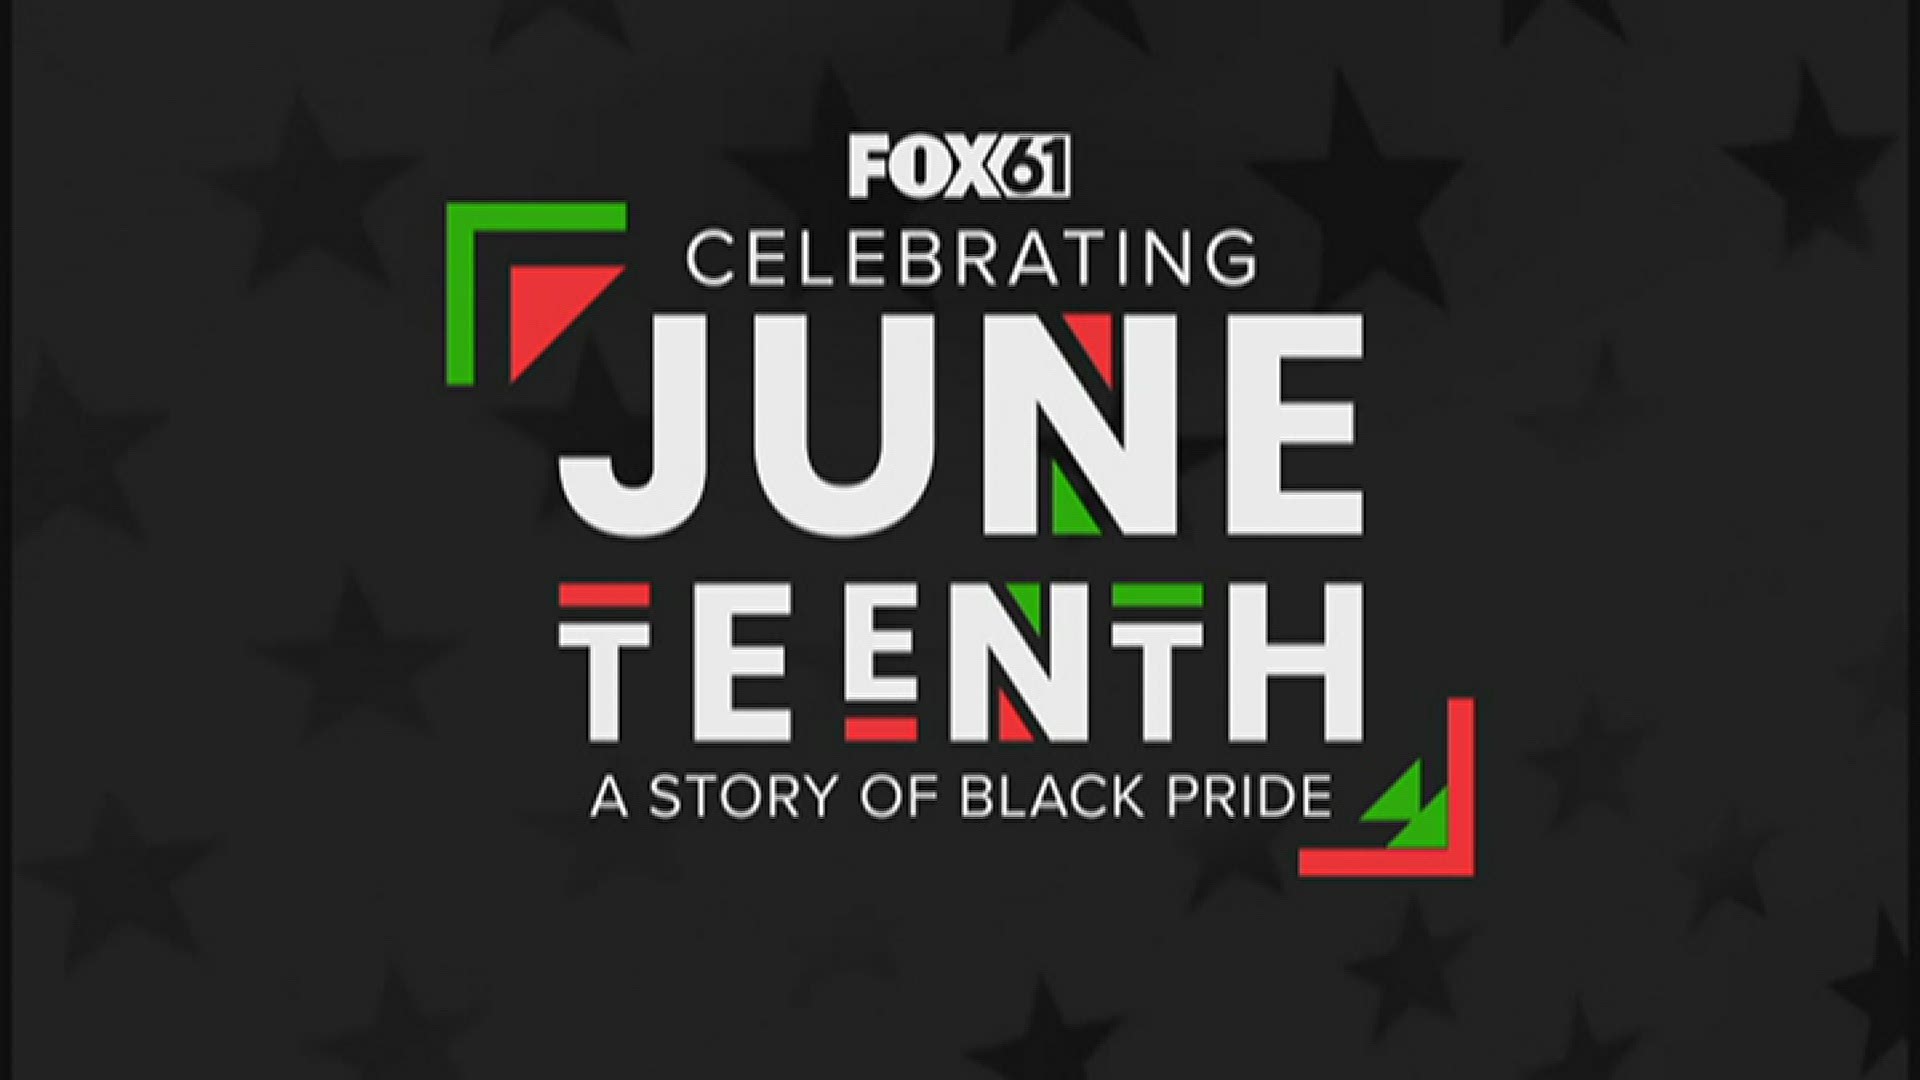 A panel of Black lawmakers and community leaders to share their reflections on Juneteenth, the state of racial equity in Connecticut and the nation.